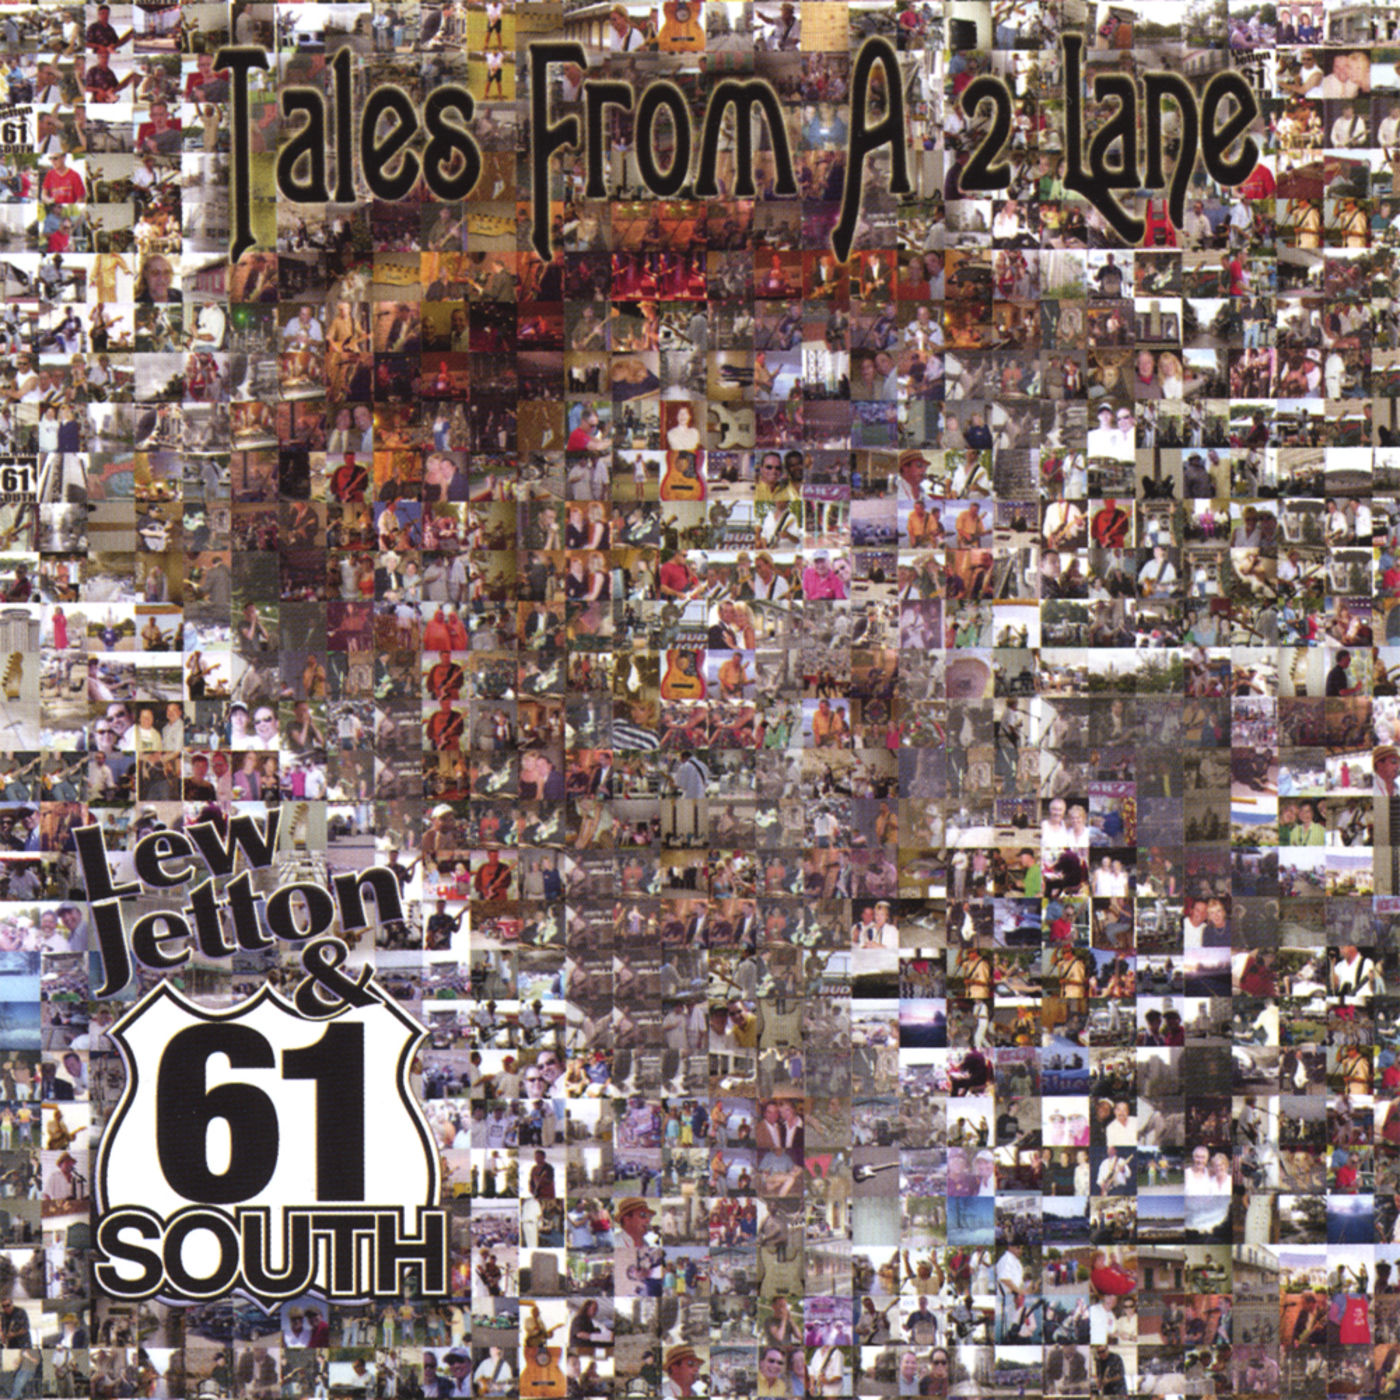 Lew Jetton & 61 South - 2023 - Tales From A 2 Lane (flac)